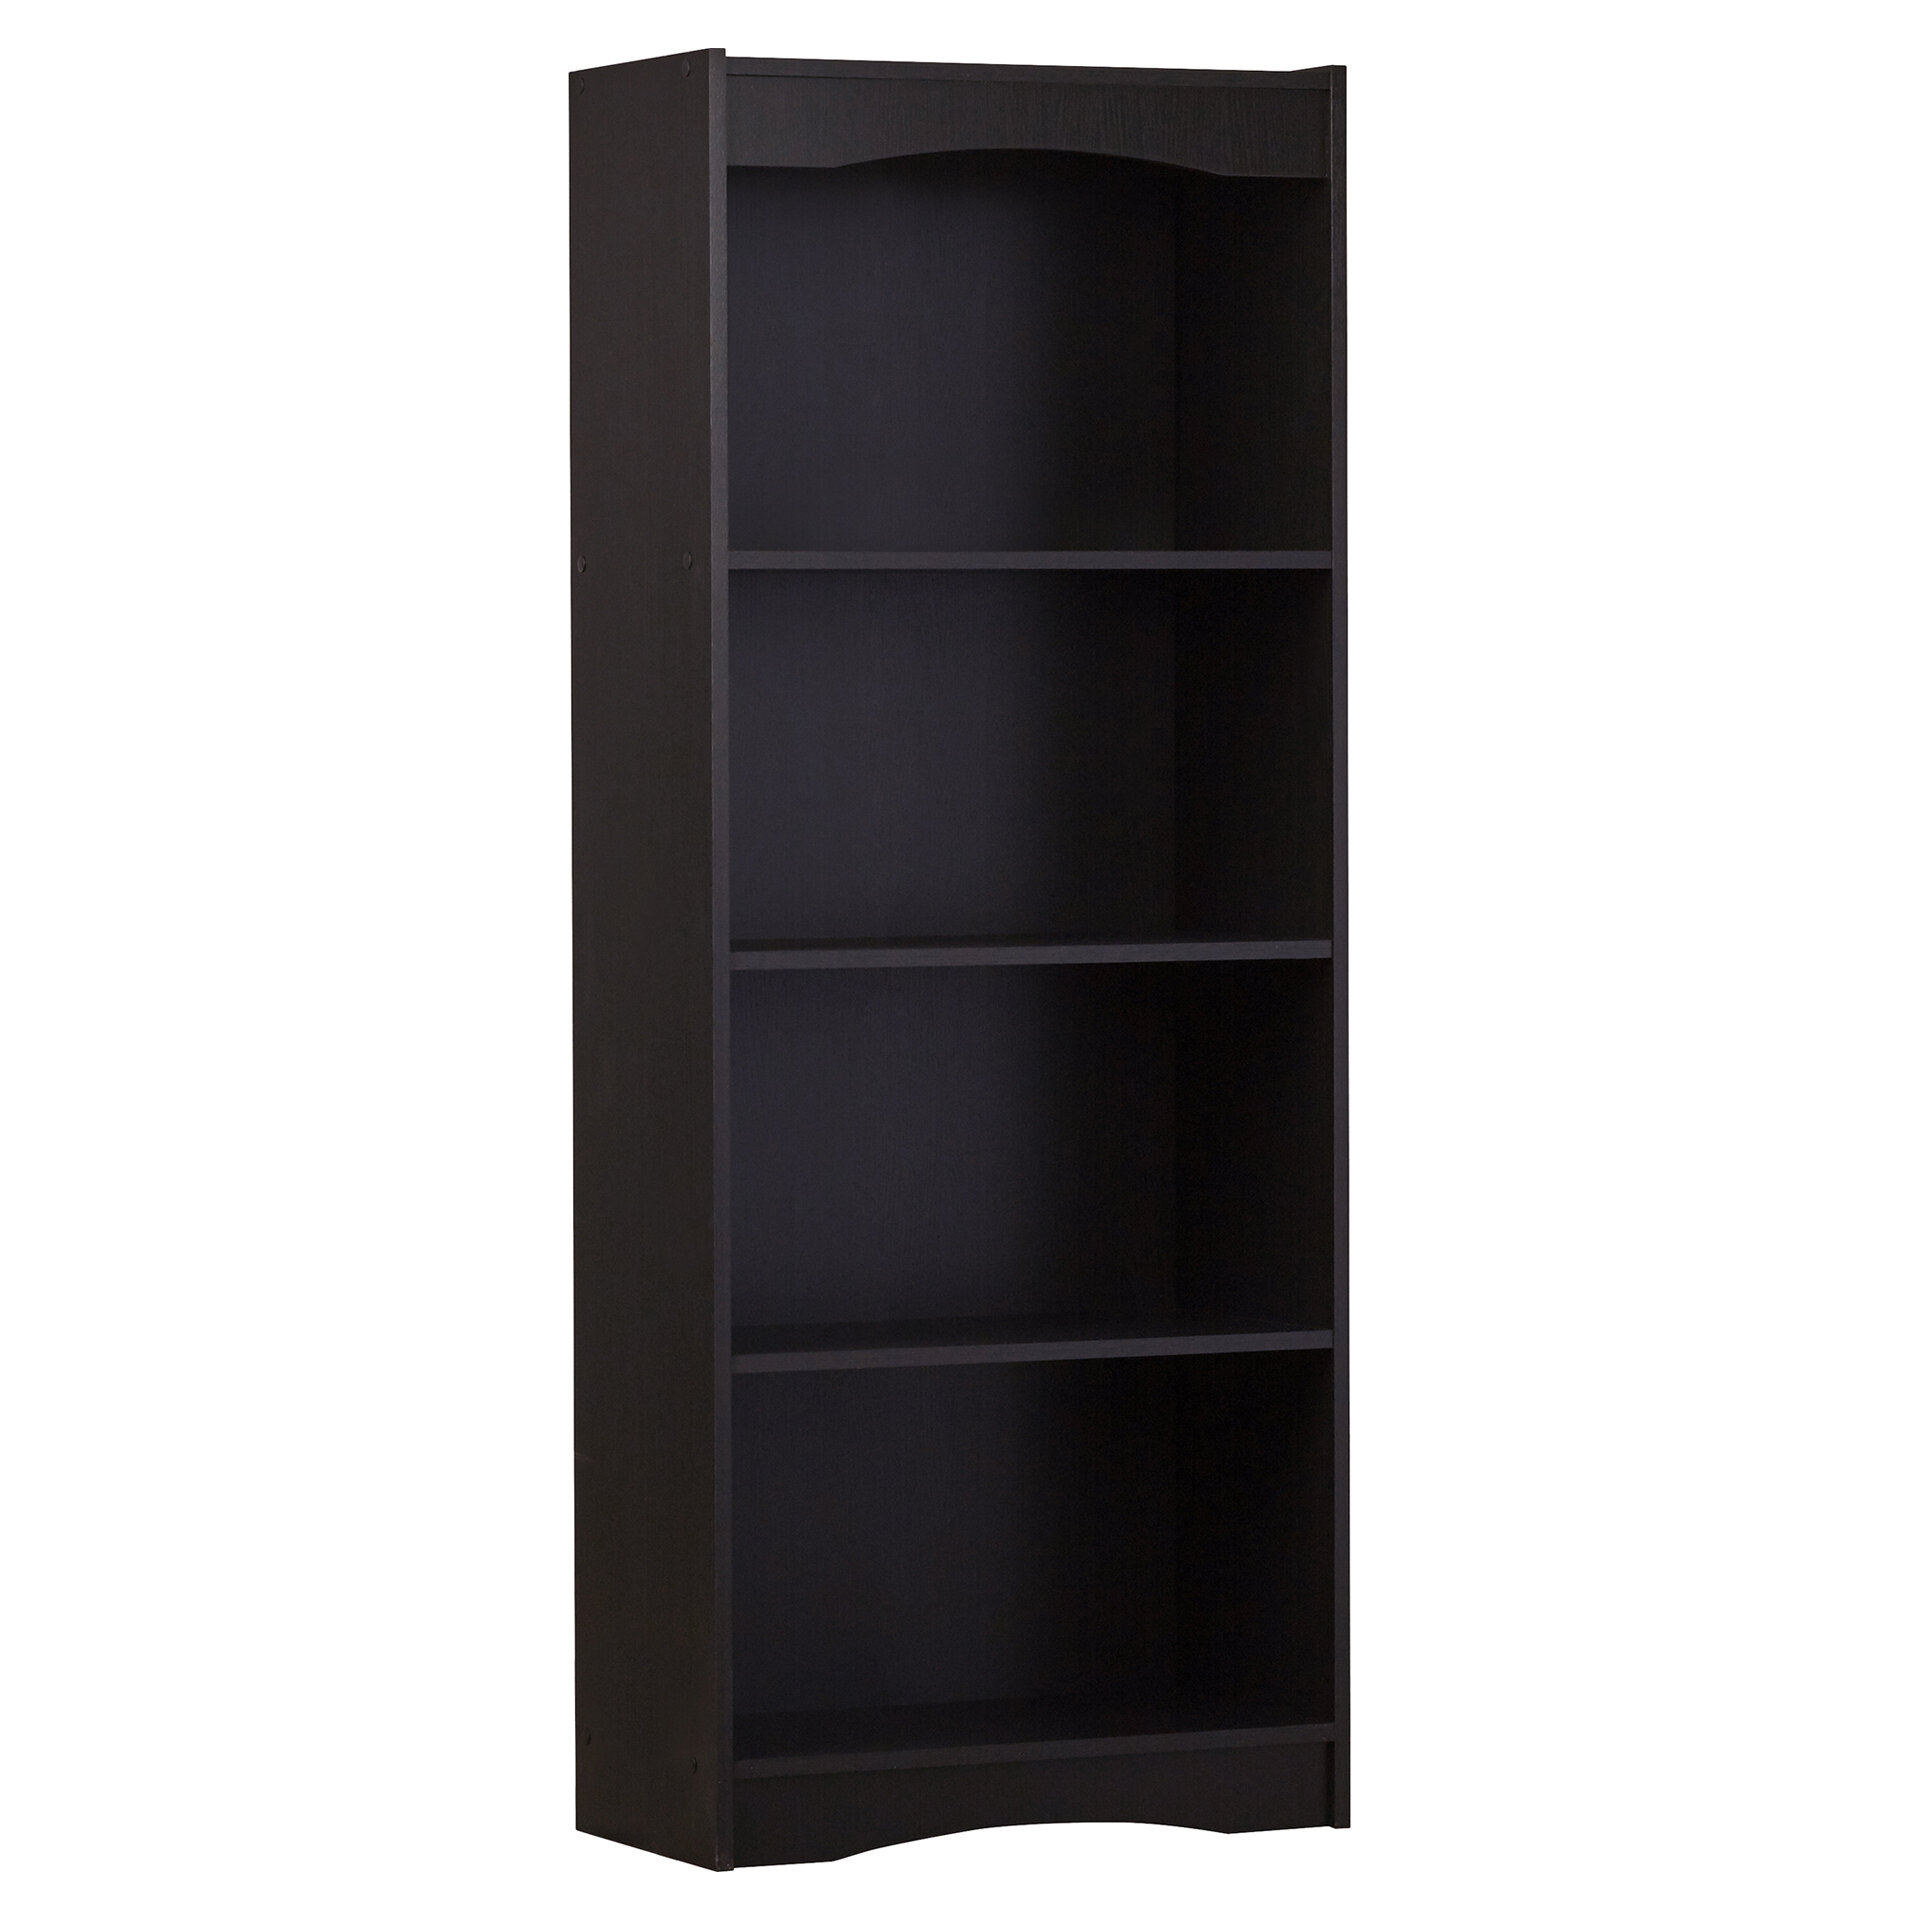 Cardell Cabinetry Literature